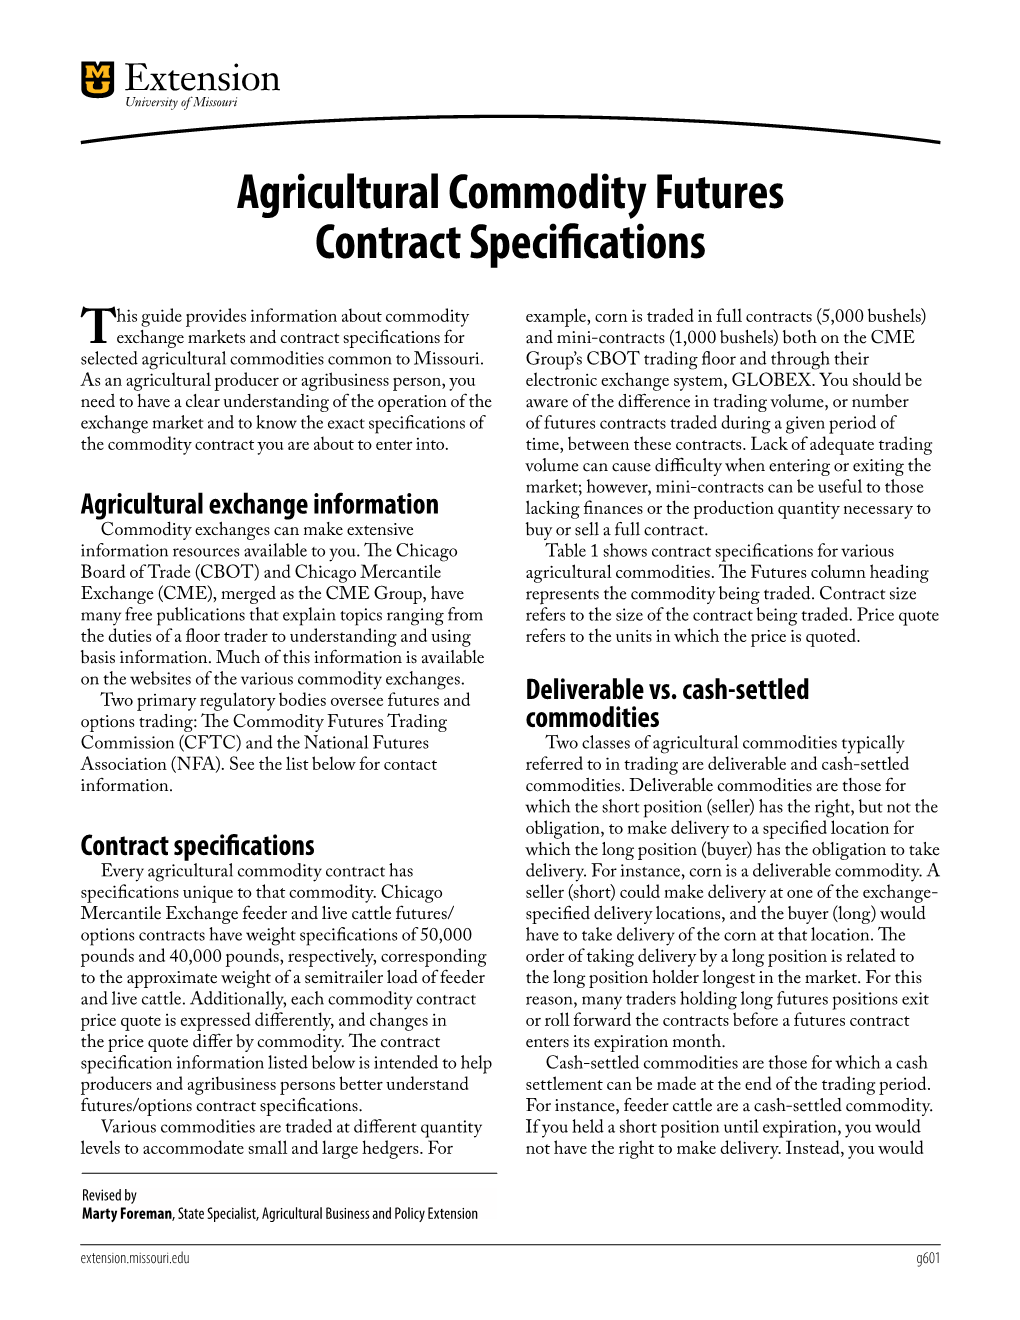 Agricultural Commodity Futures Contract Specifications